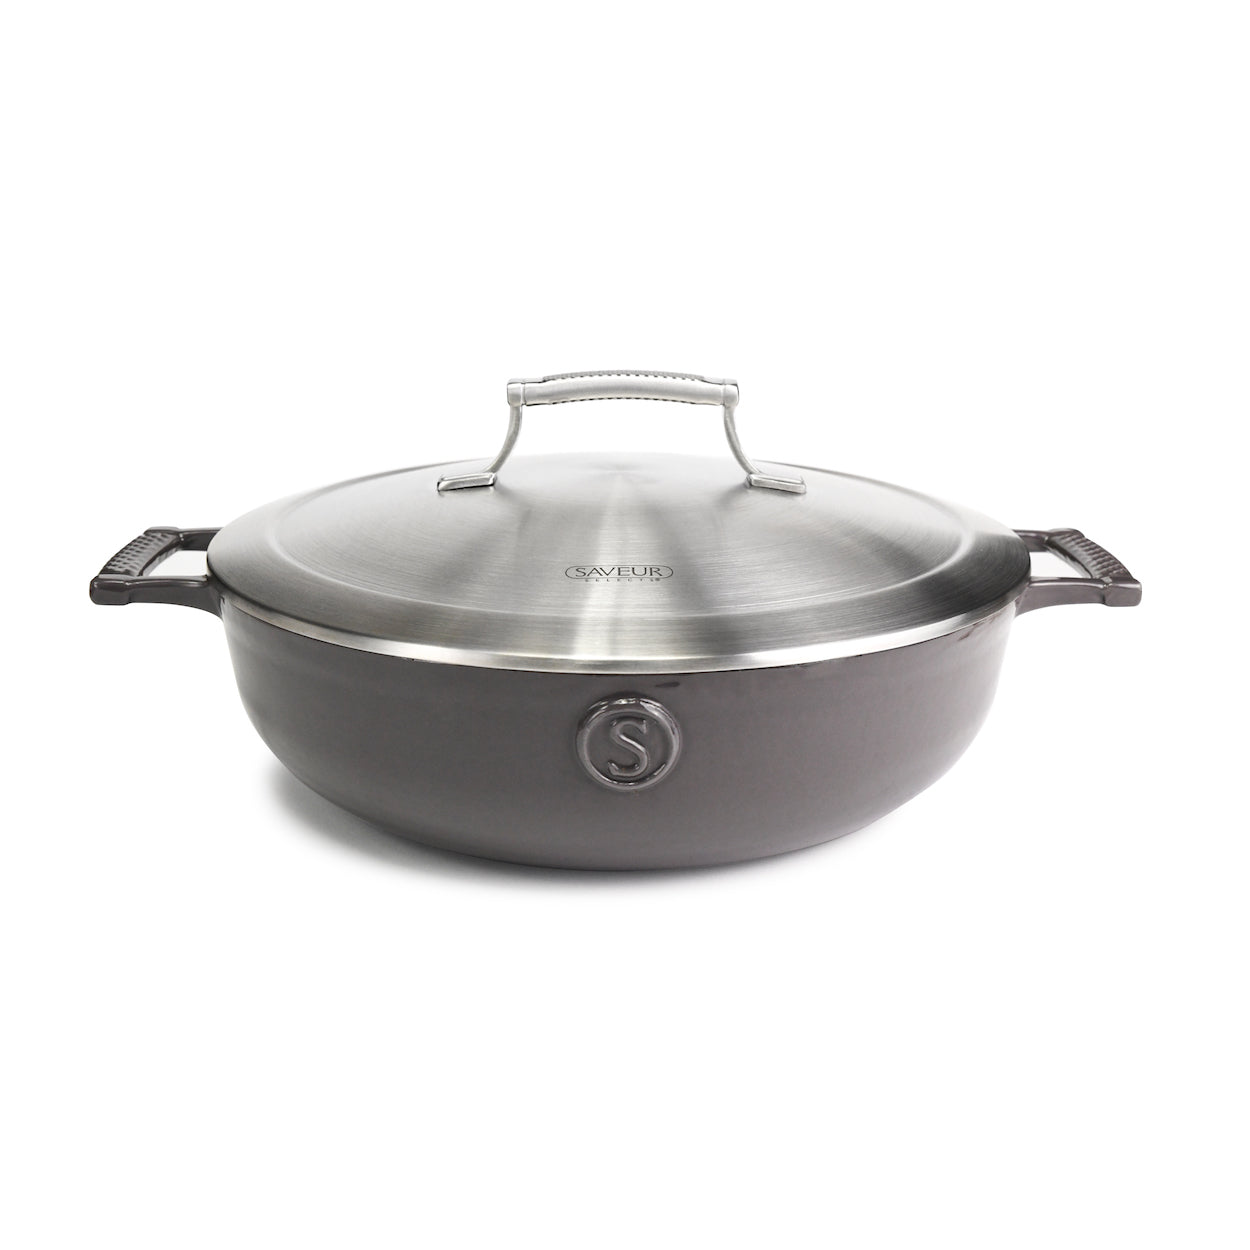 4.5-Quart Enameled Coated Oval Braiser with Stainless Steel Lid